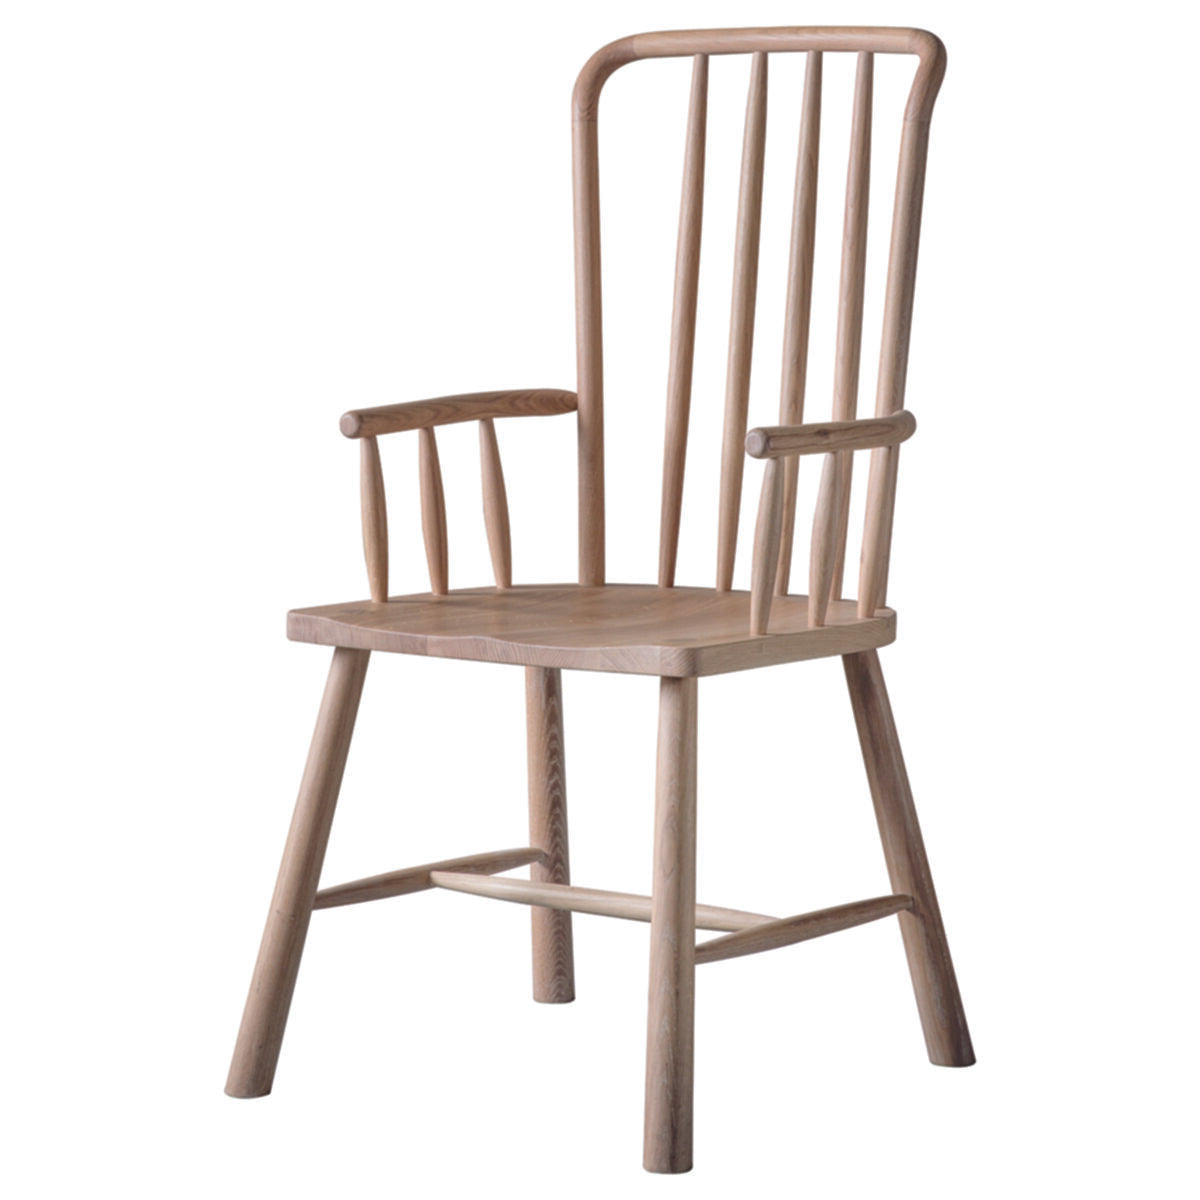 Emiko Metal And Wood Carver Dining Chair (2 Pack)